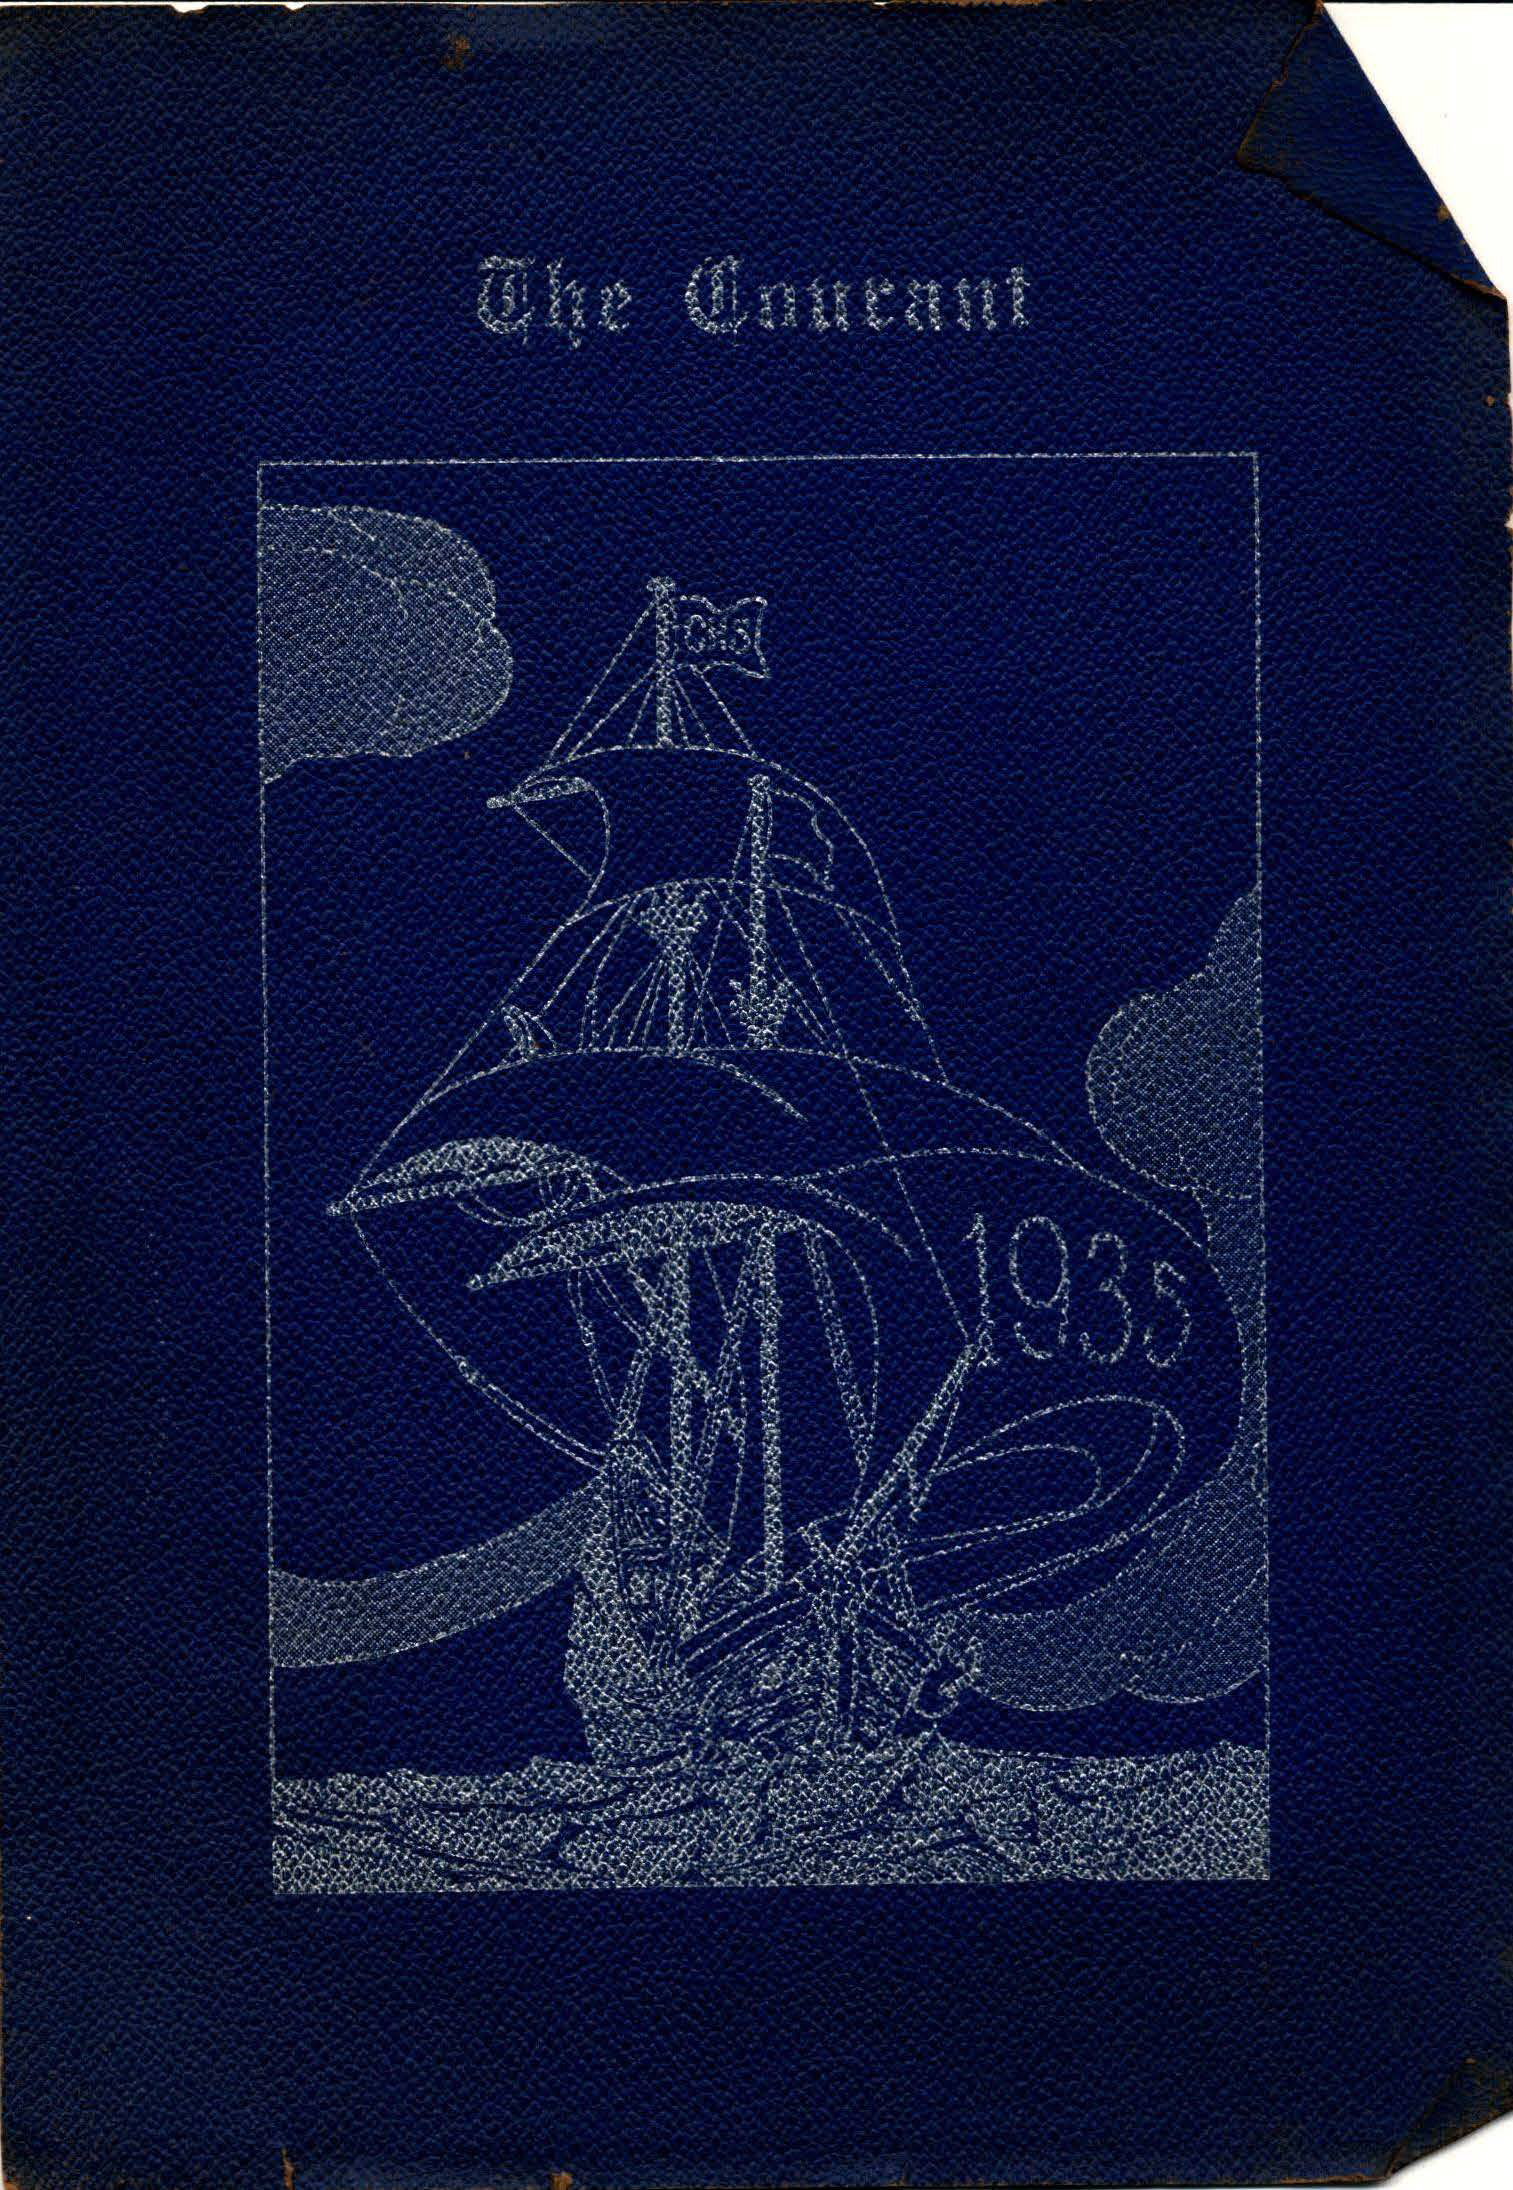 1935 Chelmsford High Yearbook 1